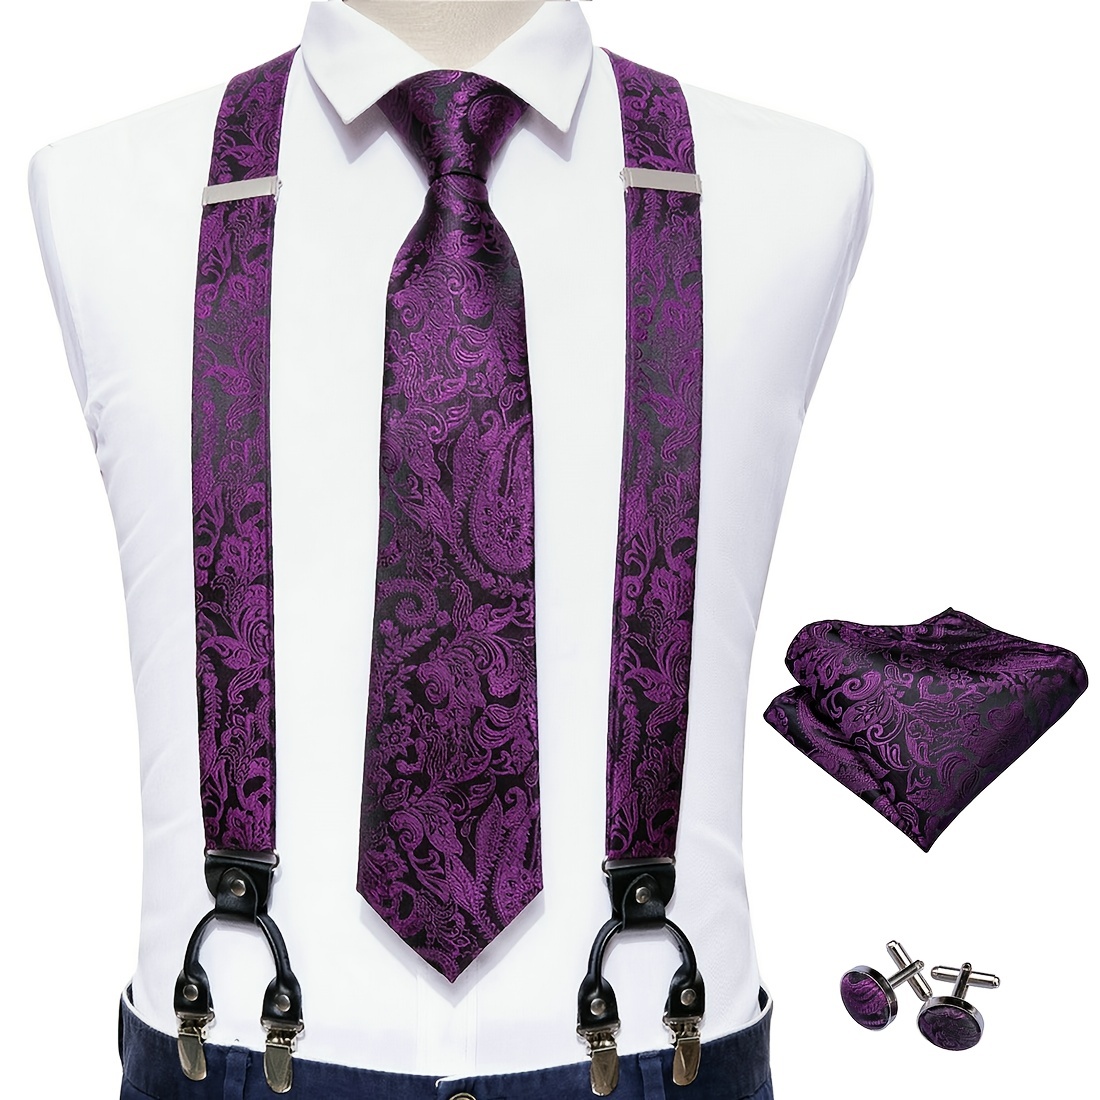 Barry Wang Mens Suspender Tie Set Adjustable Clips Y Type Suspender Floral  Paisley Jacquare Silk Necktie Handkerchief Cufflinks Formal Wedding  Accessories Purple Red Green Blue Gold Black Ideal Choice For Gifts 